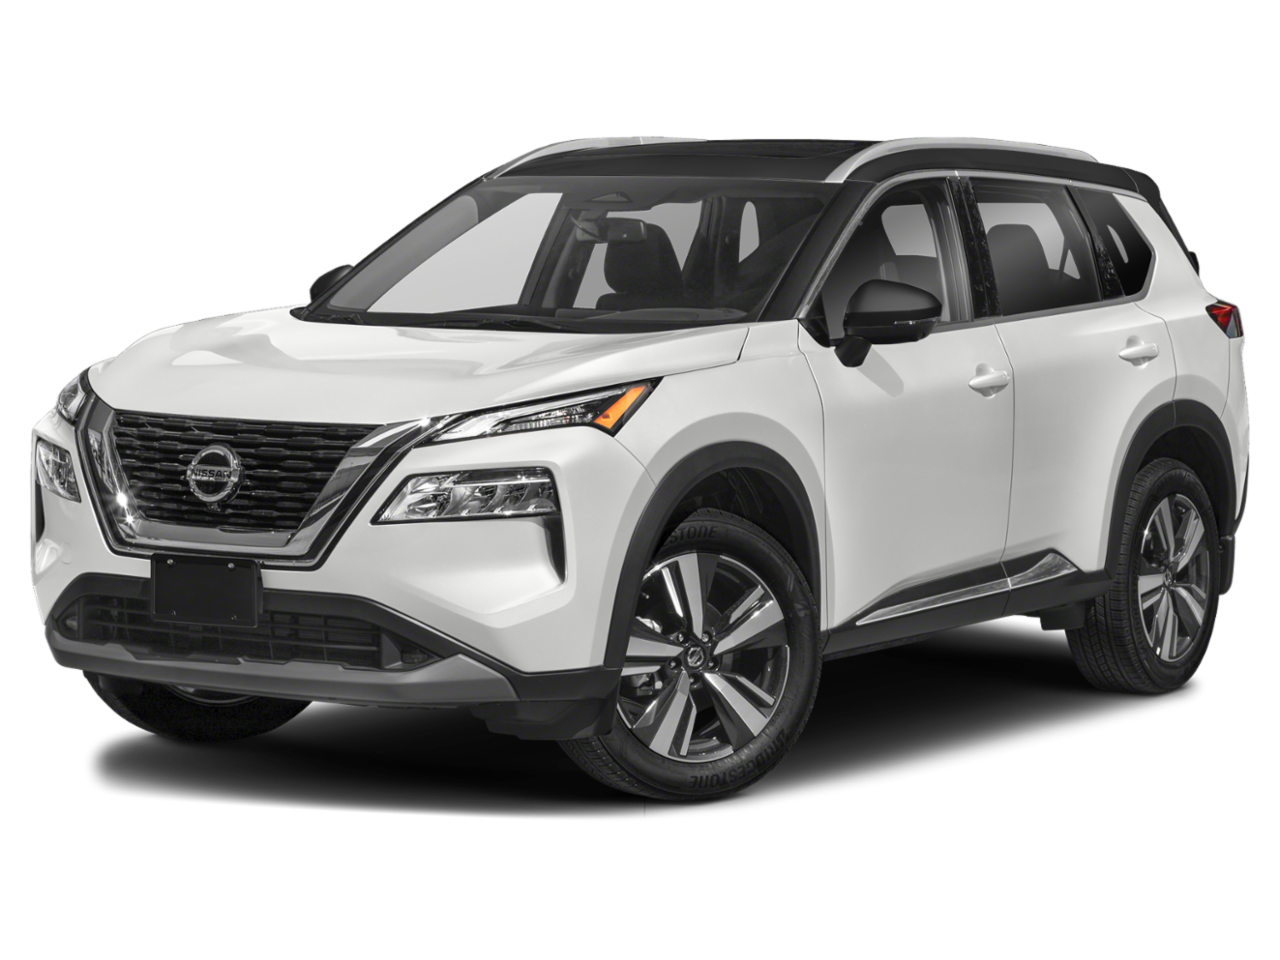 New 2023 Nissan Rogue Specials and Lease Deals in Bourbonnais at Hove